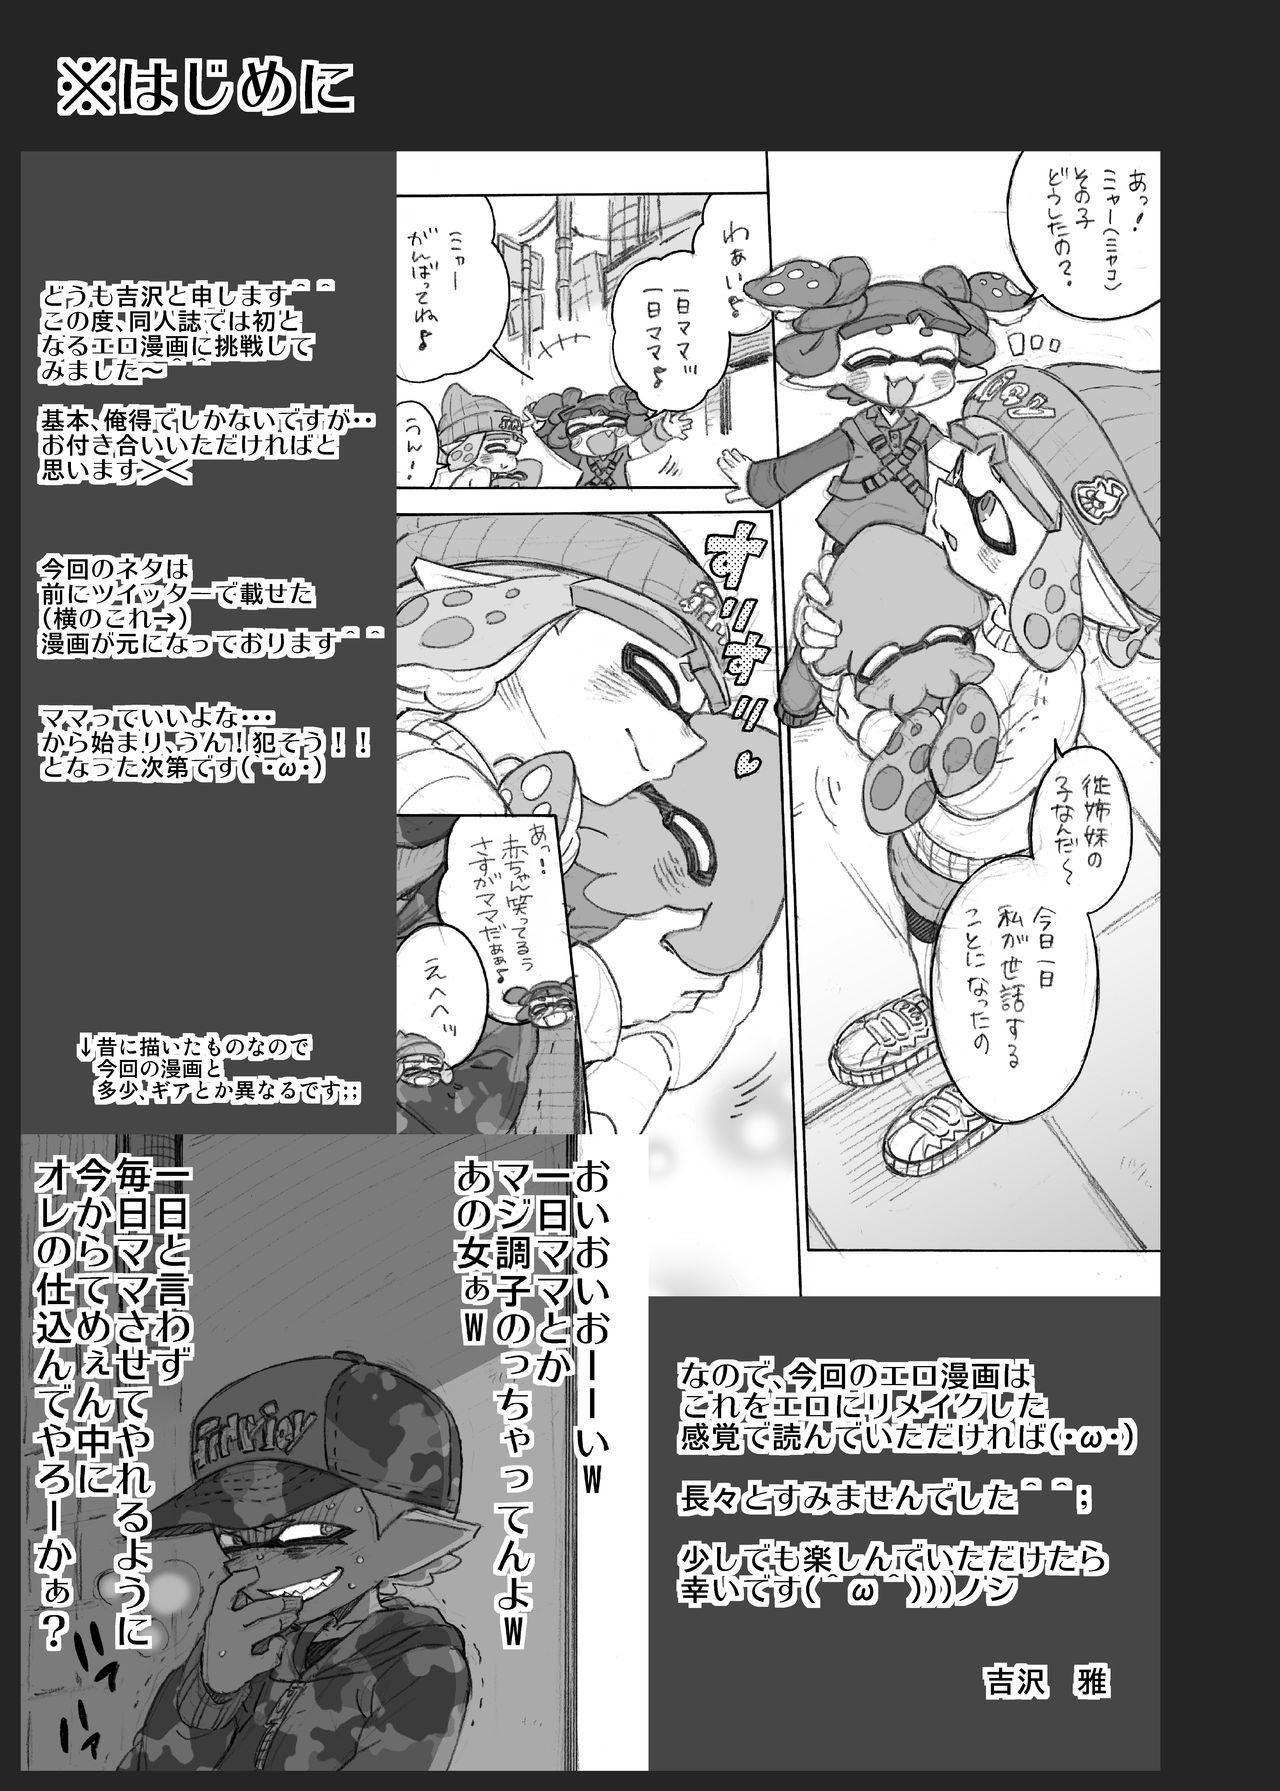 Climax Let's make that anxious daughter a mama - Splatoon Strip - Page 2